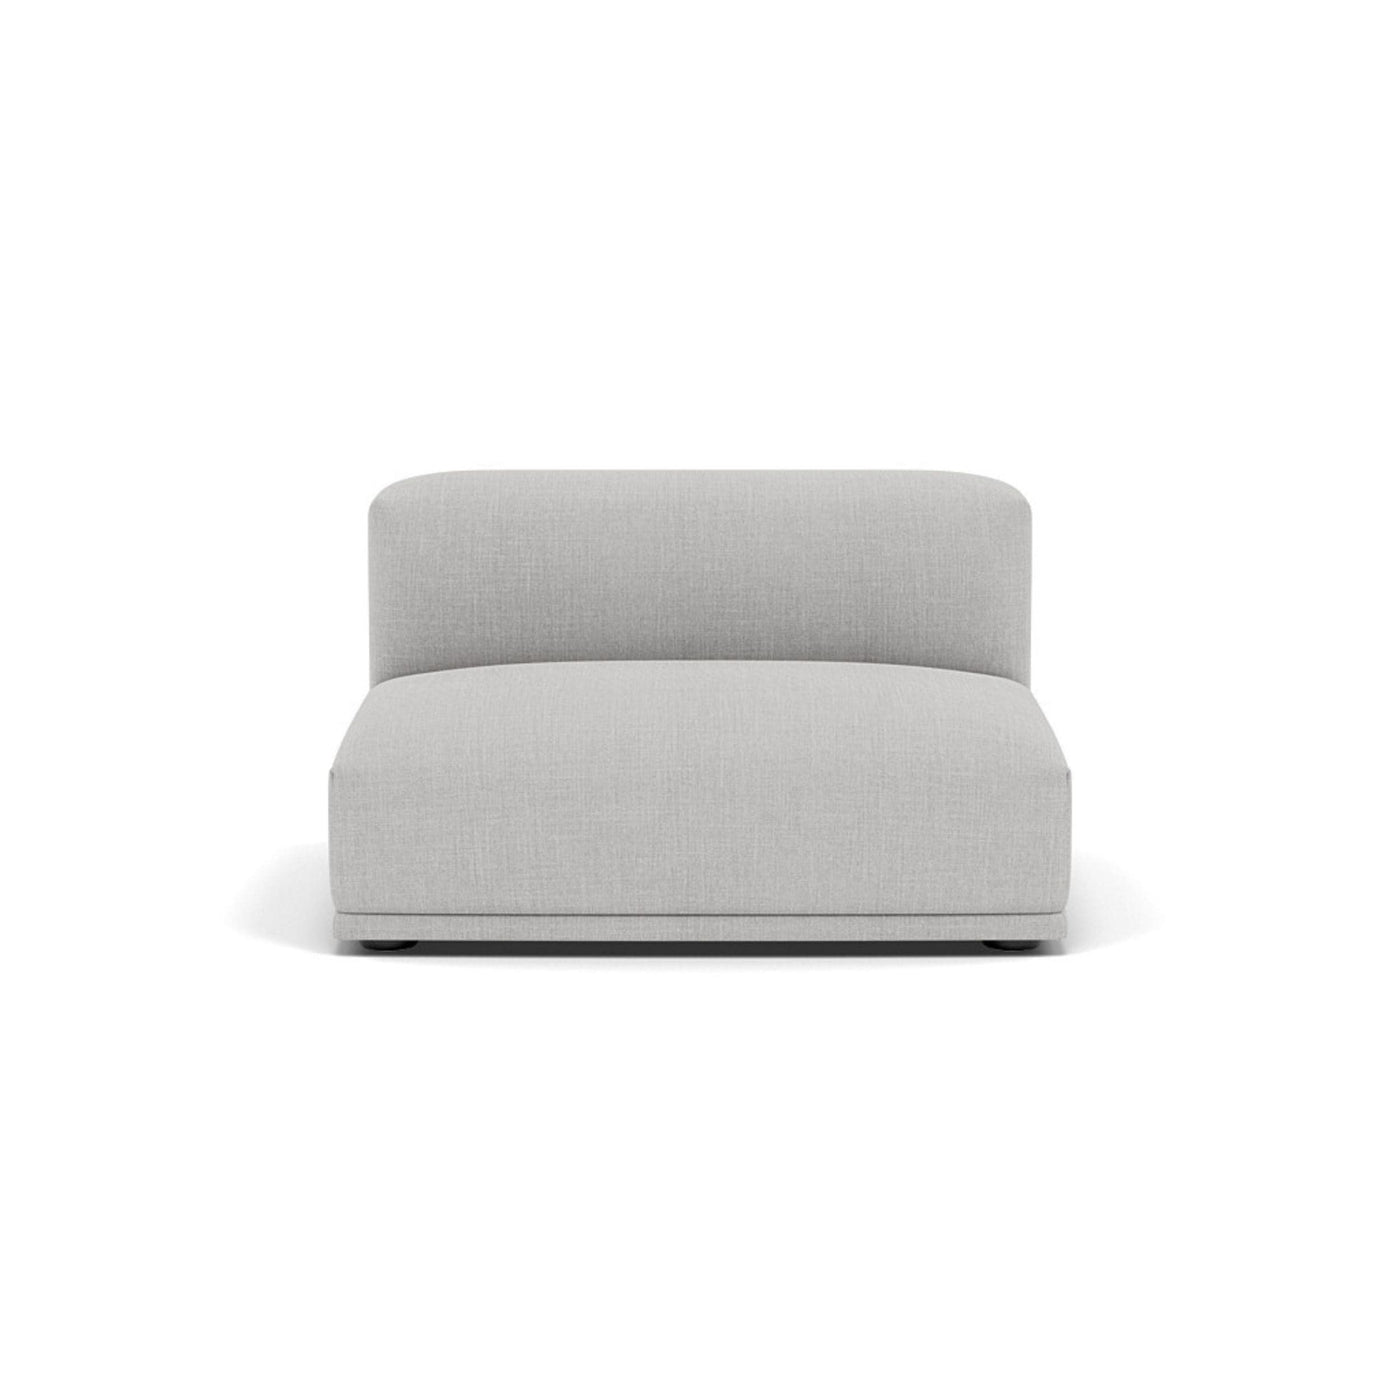 Muuto Connect Modular Sofa System, module c, long centre, remix 123 grey fabric. Available from someday designs. #colour_remix-123